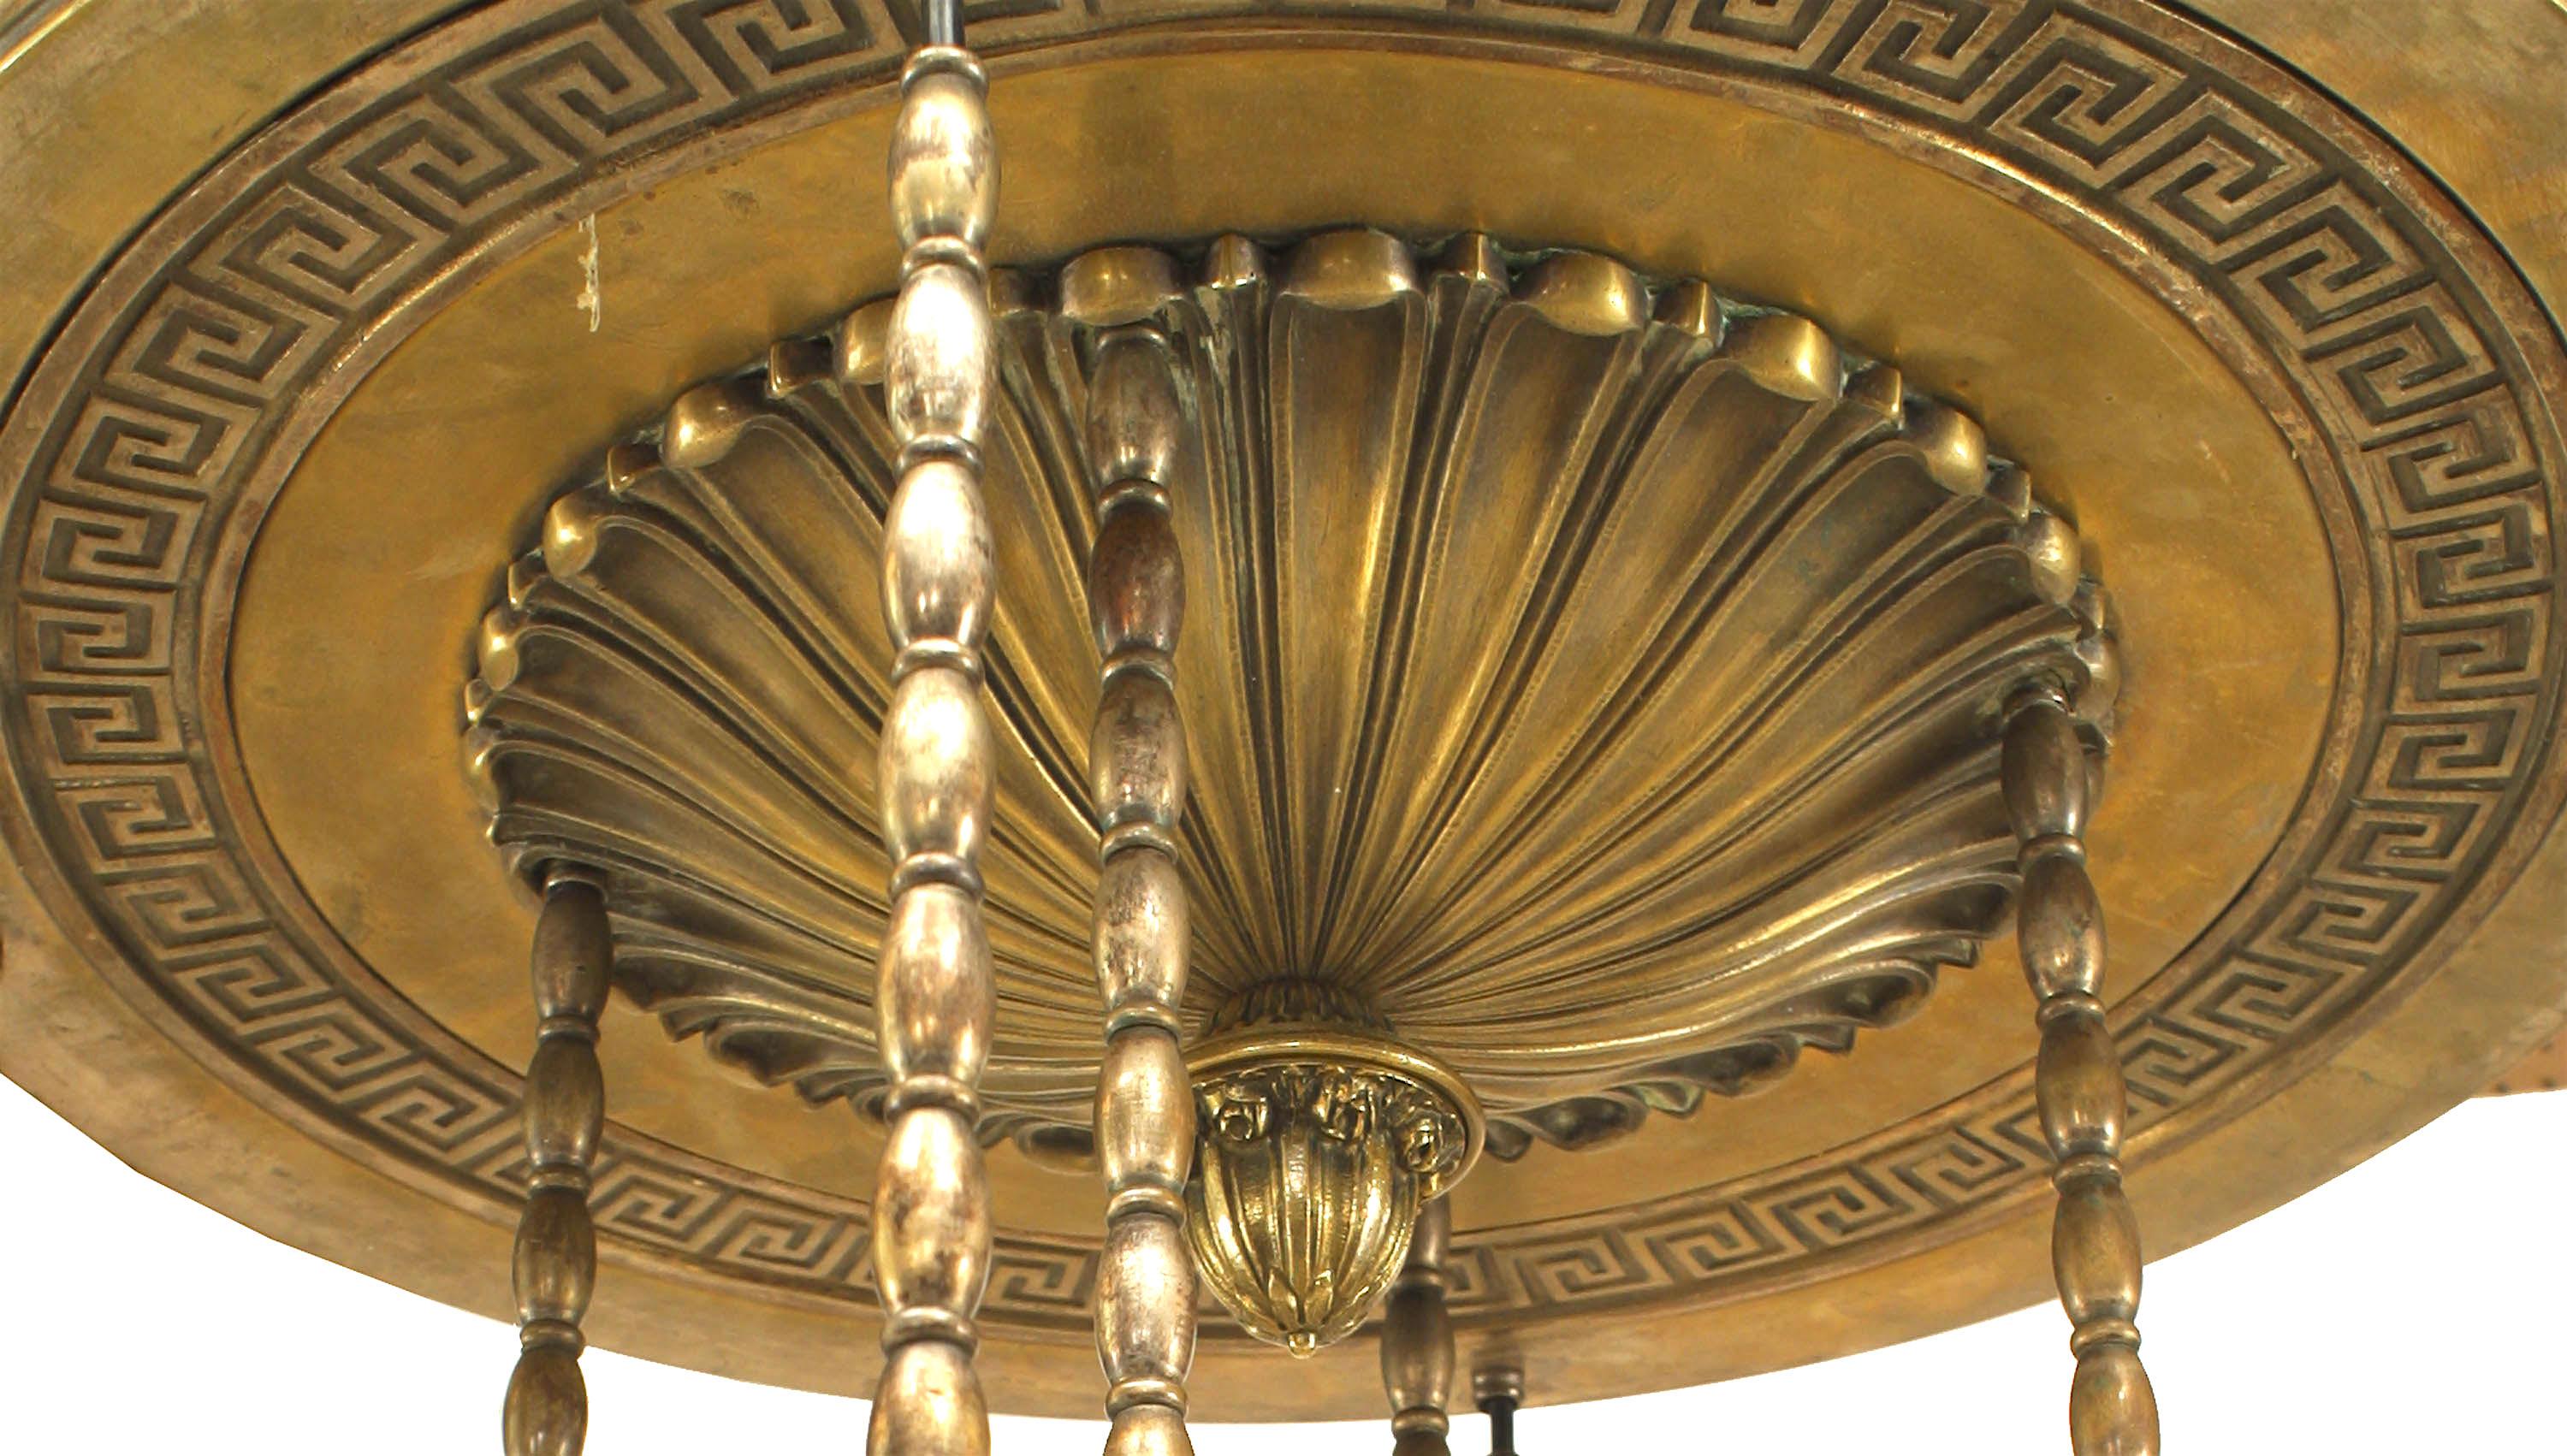 American Art Deco silver plate bronze chandelier with 4 glass shades and large round canopy. (I Comfort/Chicago mercury glass reflector uplight shade).
   